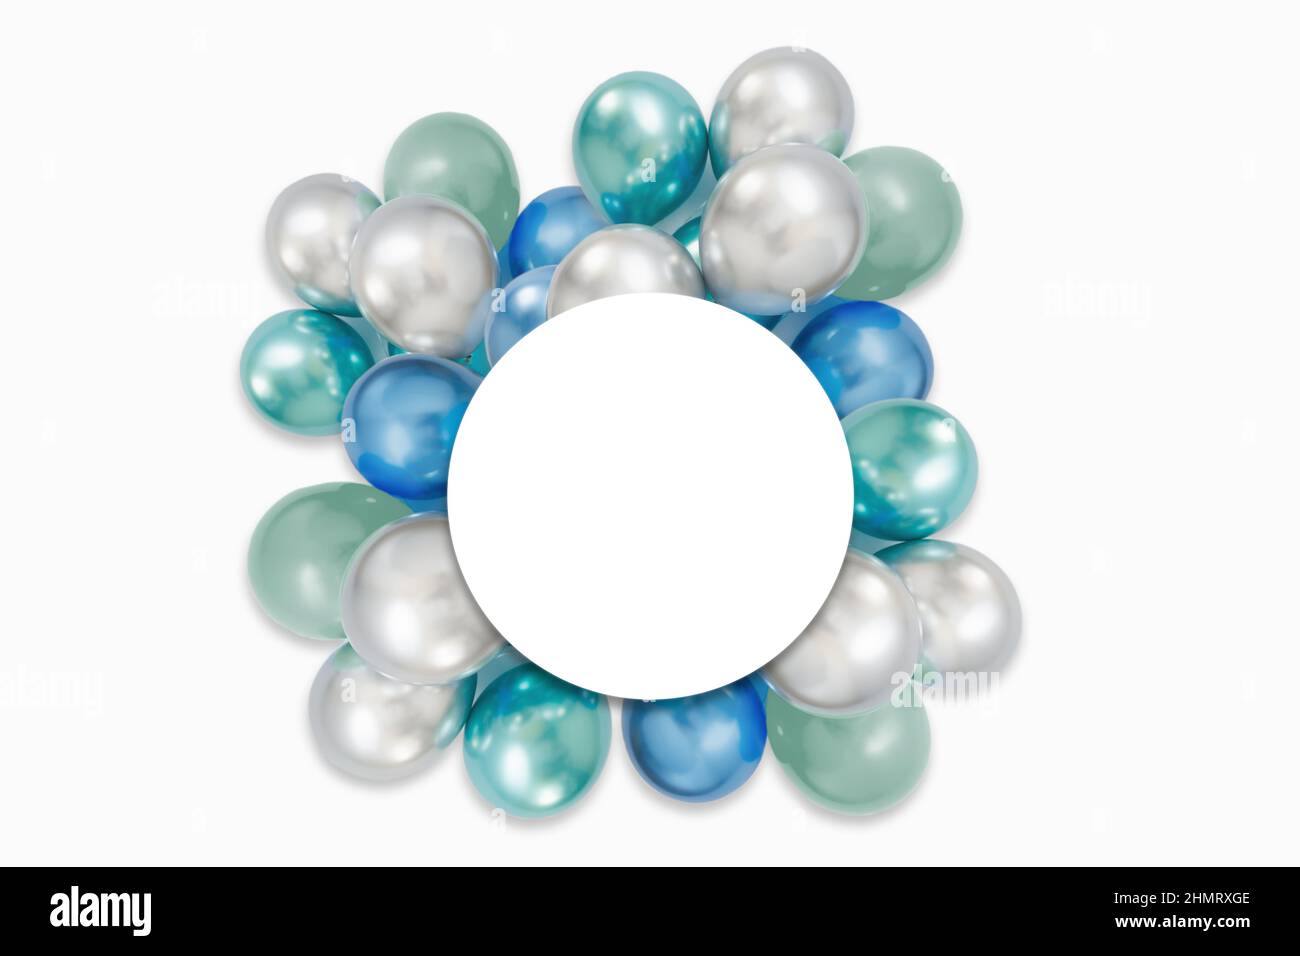 Blue and silver balloon on the light background. High top view. Holiday, carnival or birthday party concept. Stock Photo